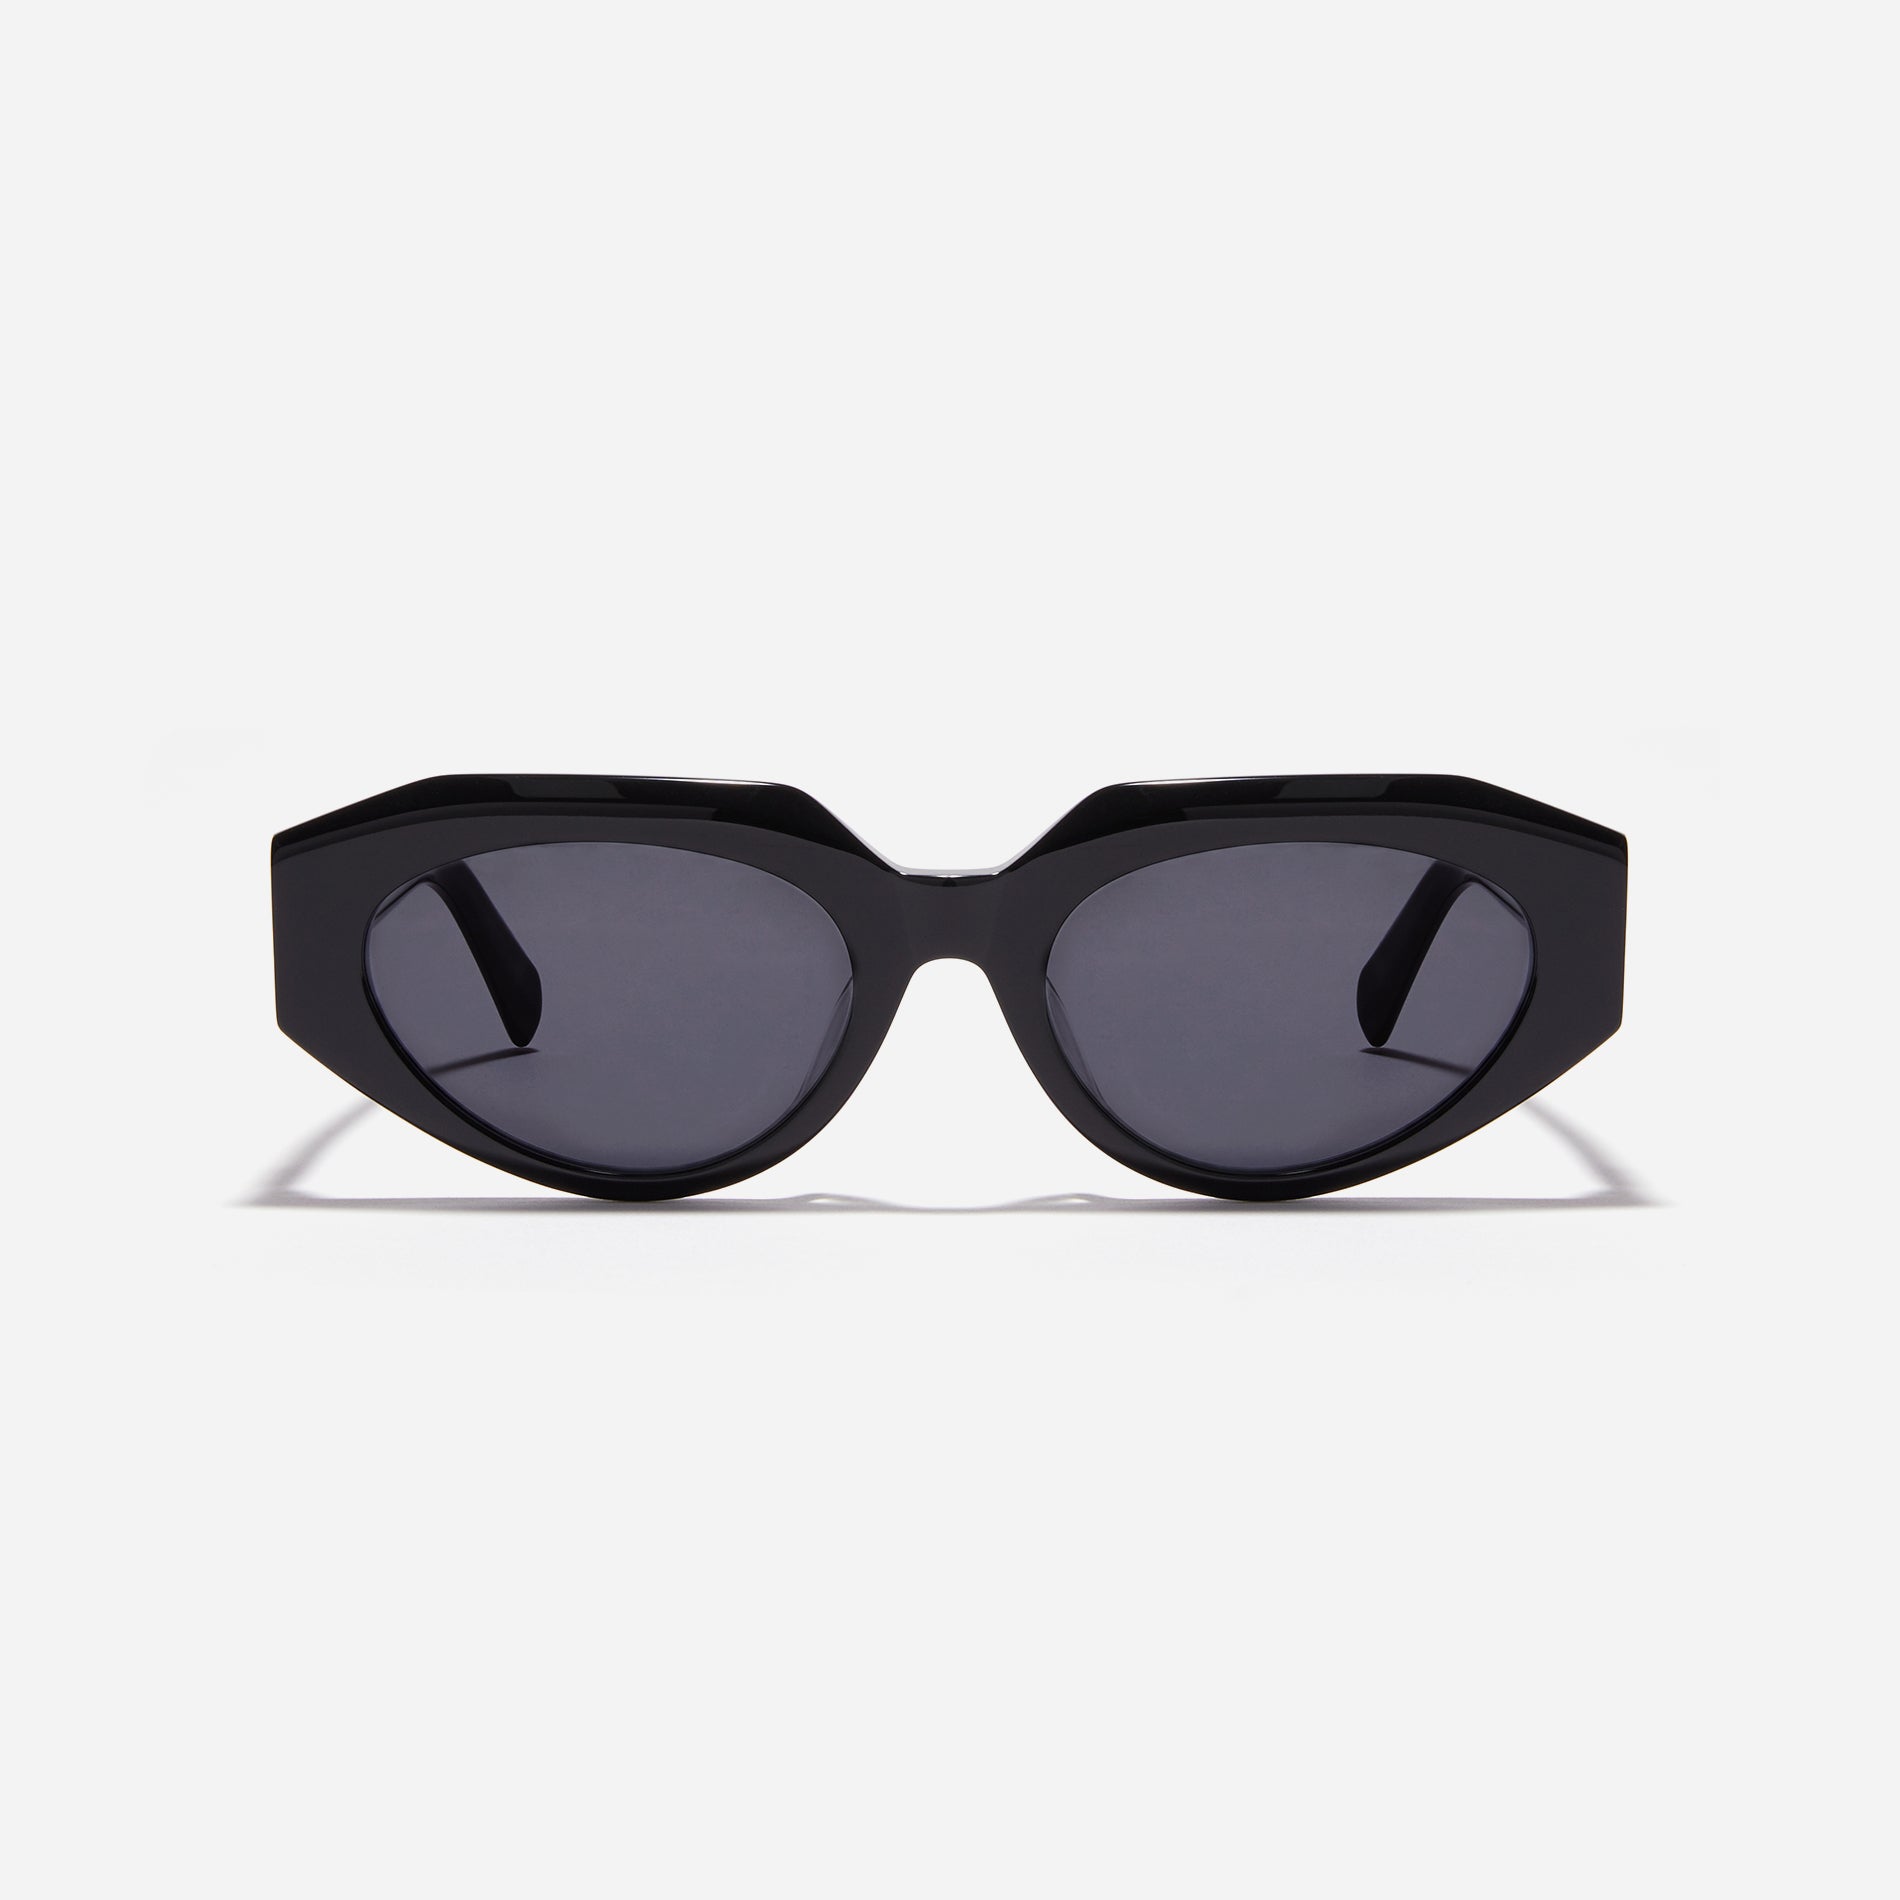  Born from the CARIN x OIOICOLLECTION collaboration, the FACET sunglasses are designed with a sleek narrow rim style that gives a modern twist to the '90s retro vibe. The temples showcase a newly redesigned OIC logo emblem, highlighted by a soft color palette, adding a touch of fashion-forward style.